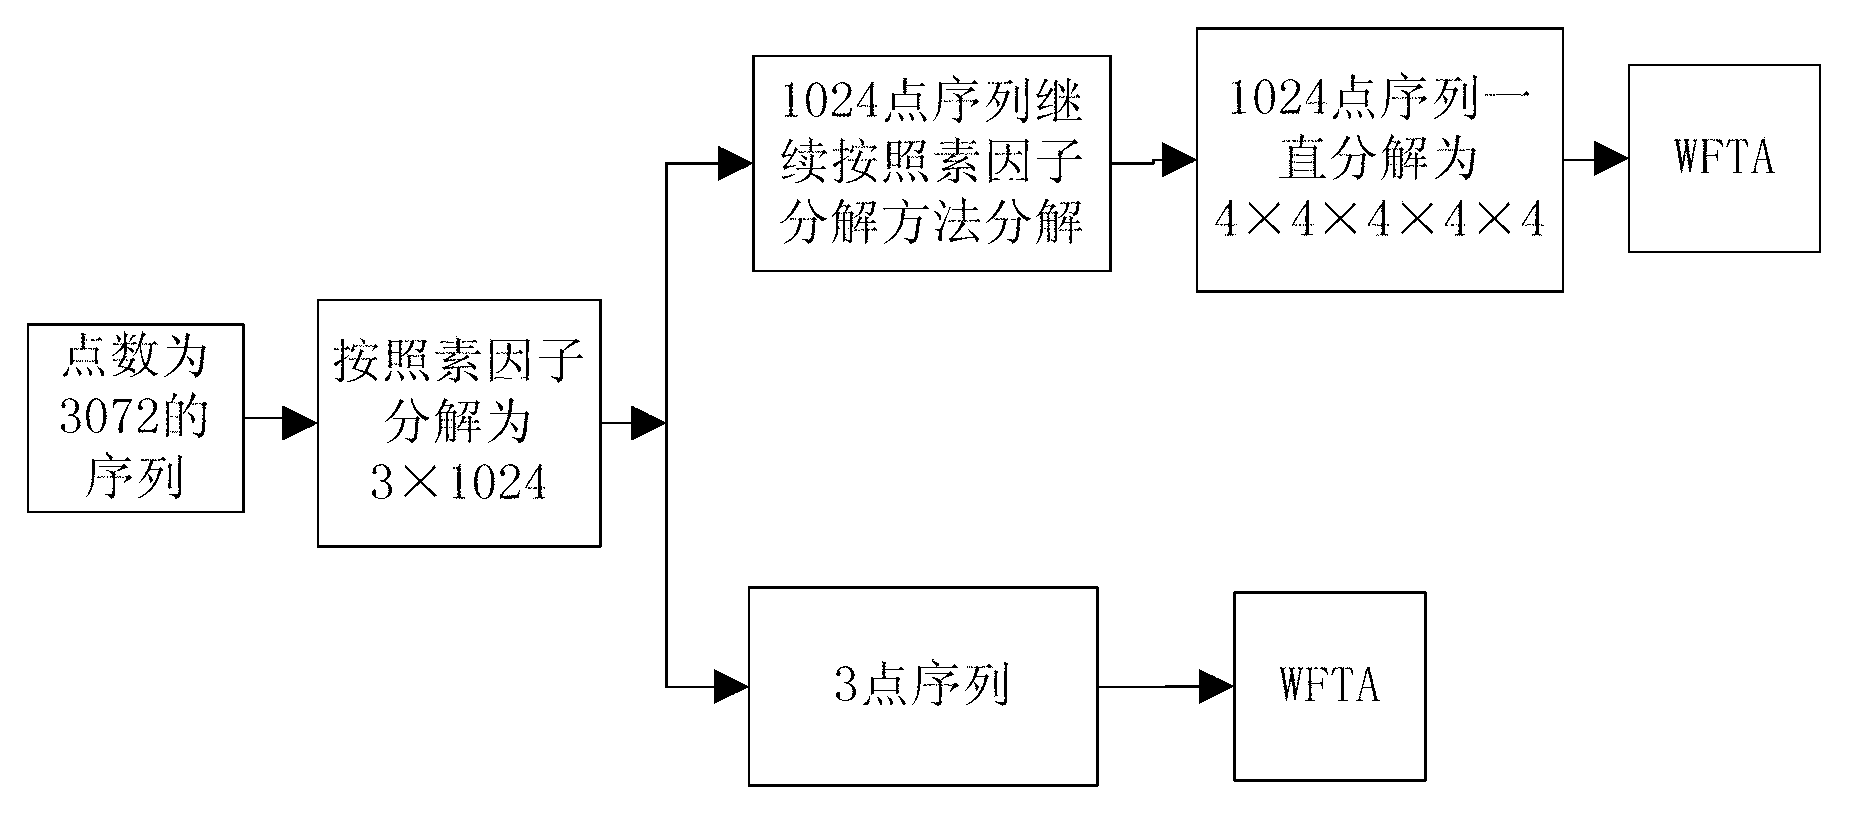 Realization method for fast computation of discrete Fourier transform with non-second power points